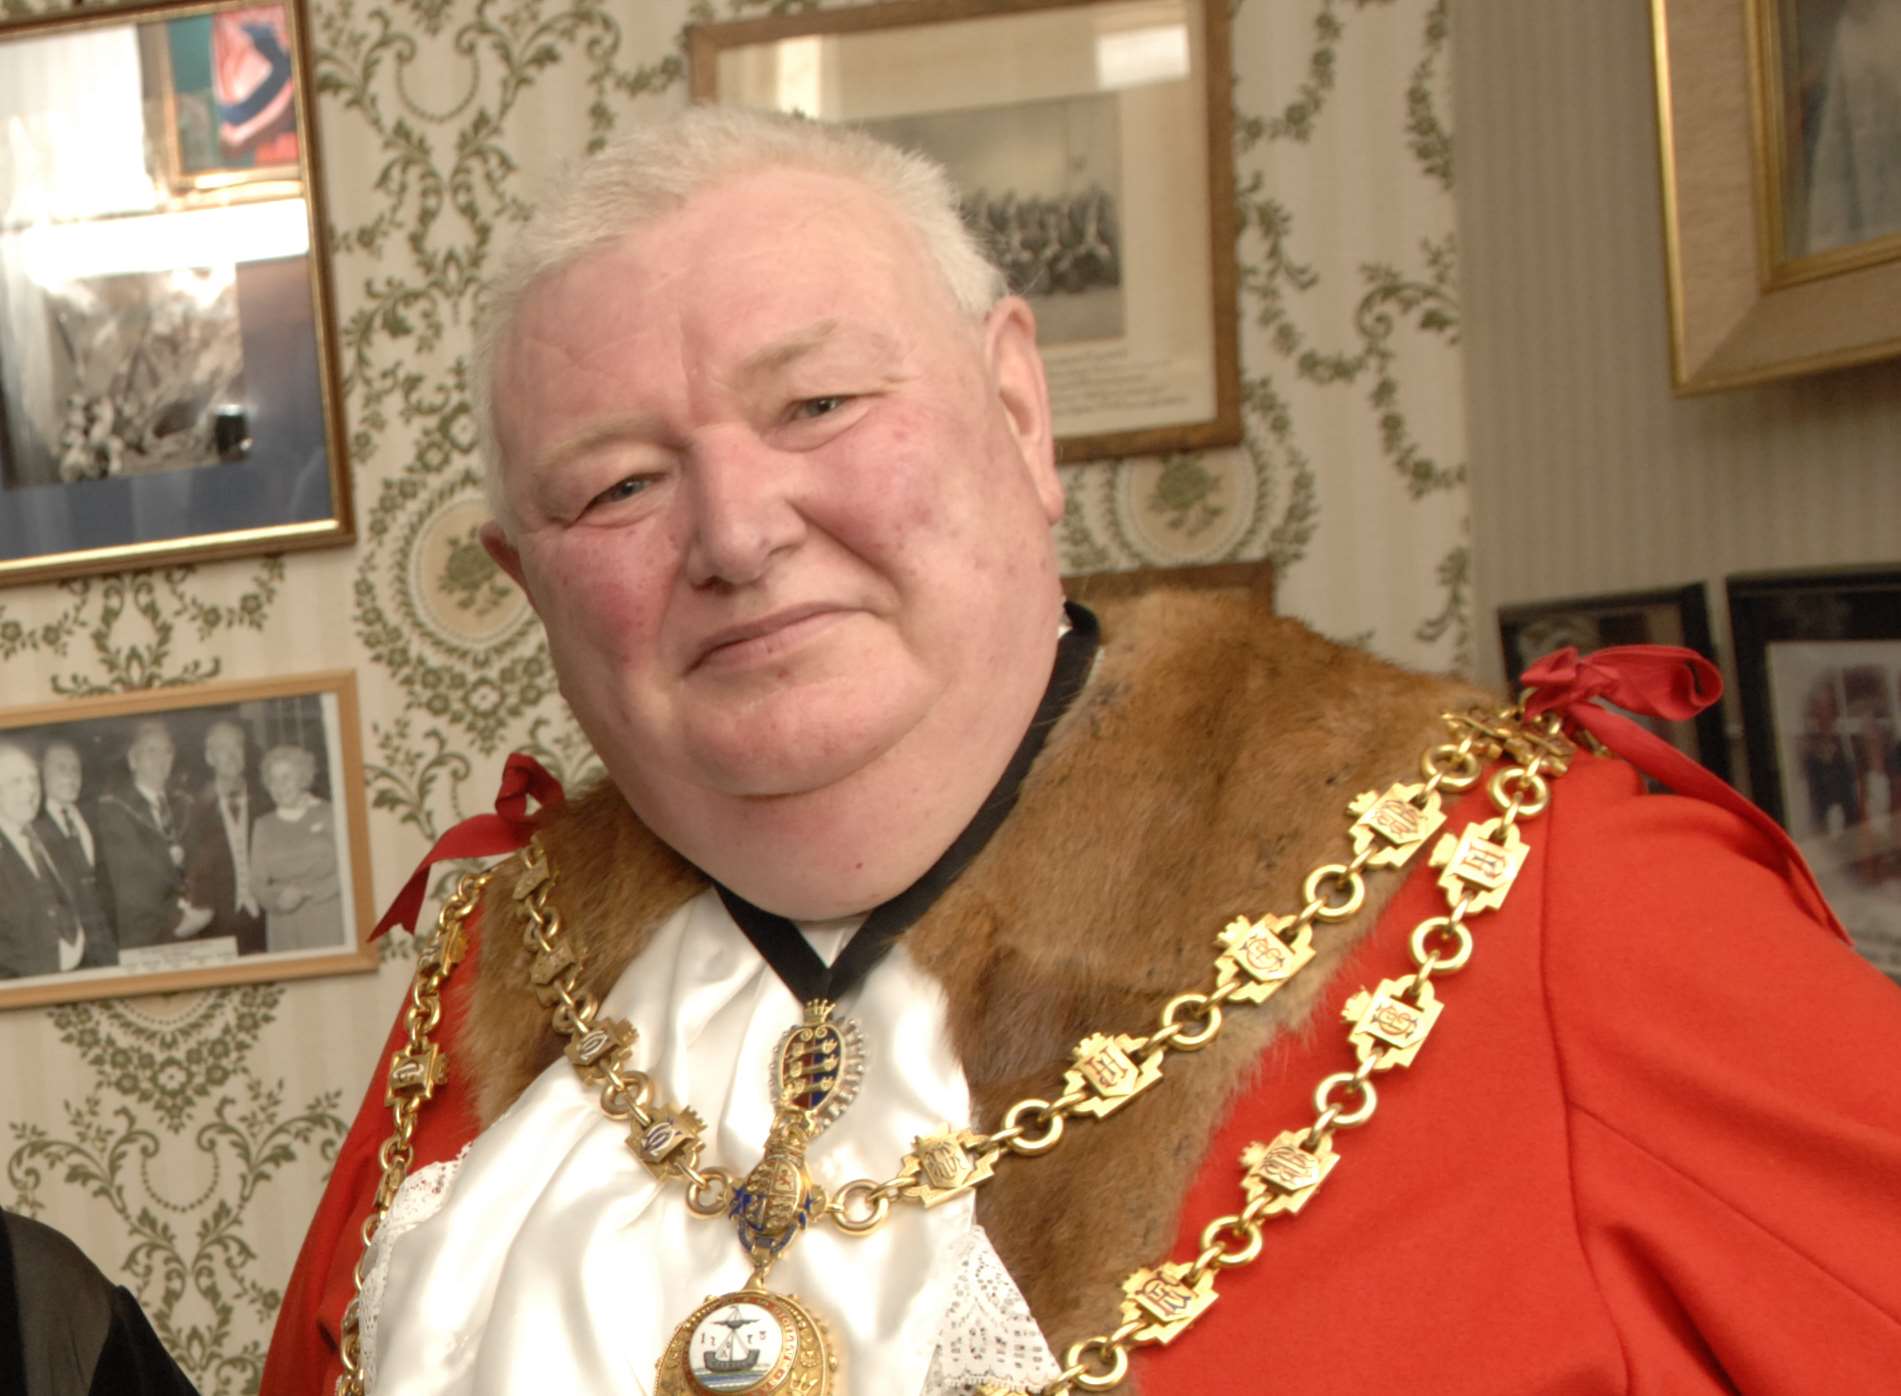 Former New Romney Mayor Alan Snoad, whose death has now been announced.